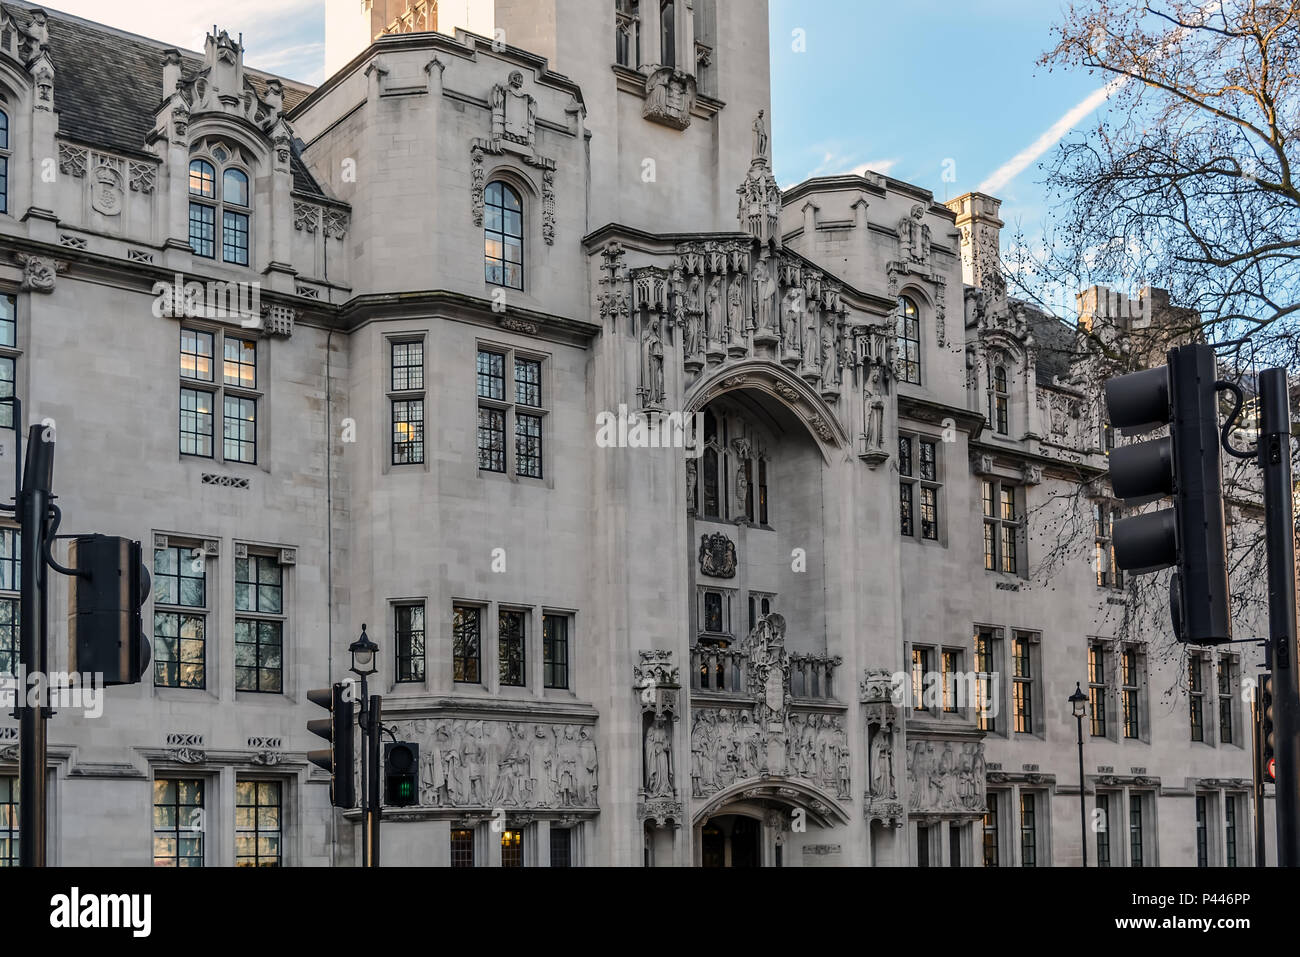 The art nouveau Gothic facade of The Middlesex Guildhall which is the home of the Supreme Court of the UK. The impressi Stock Photo